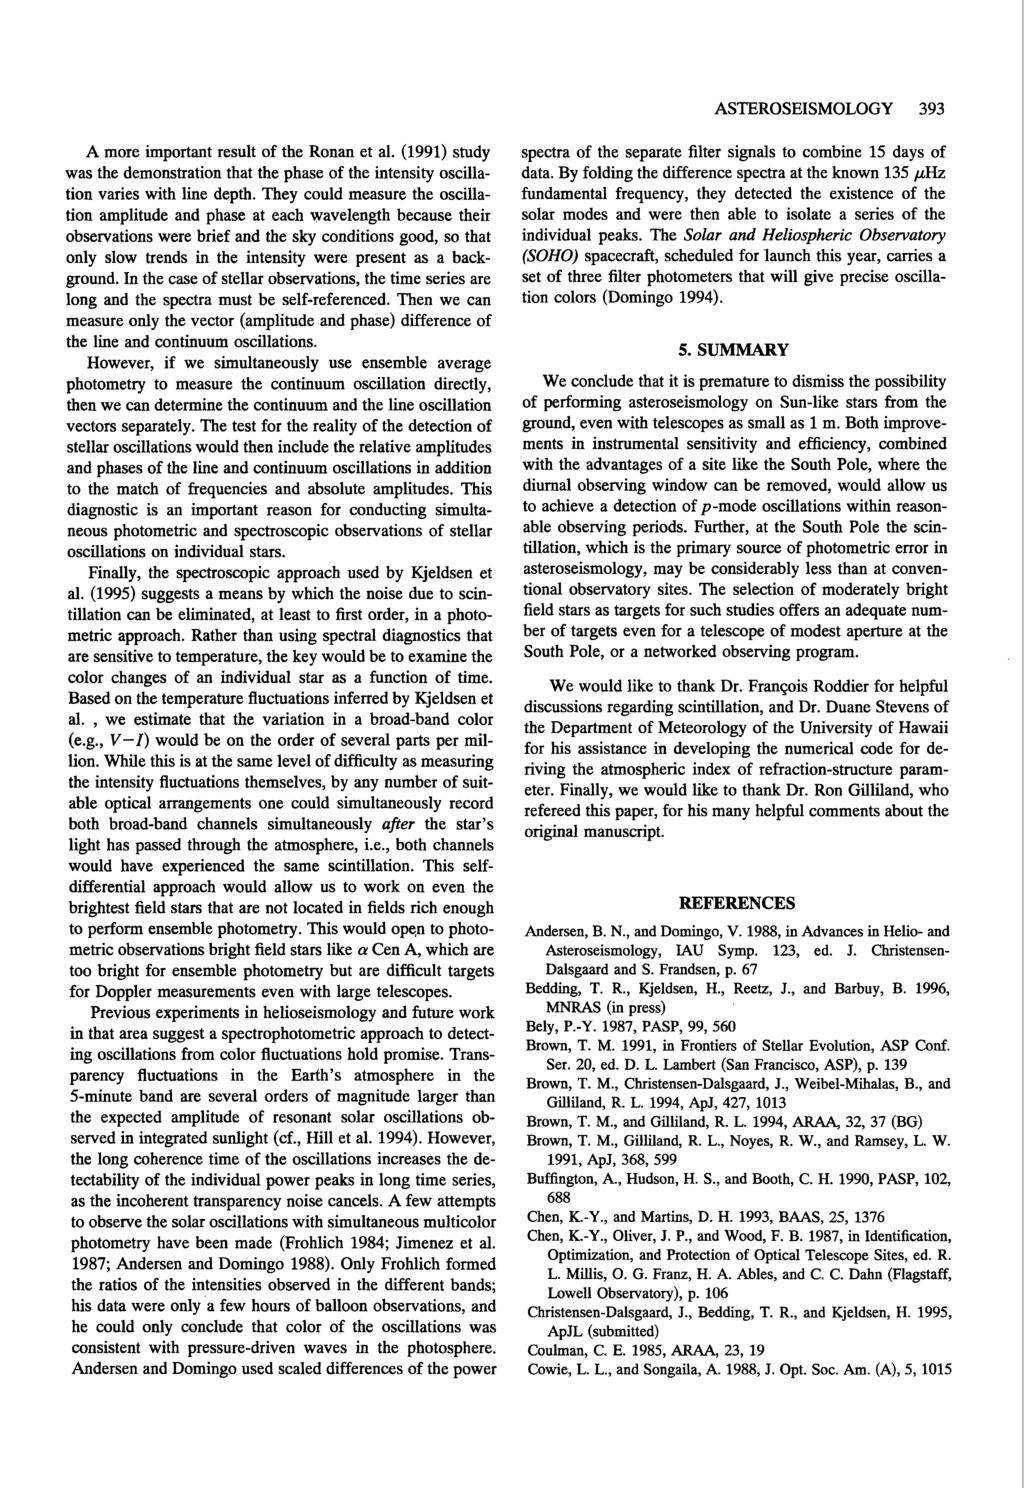 ASTEROSEISMOLOGY 393 A more important result of the Ronan et al. (1991) study was the demonstration that the phase of the intensity oscillation varies with line depth.